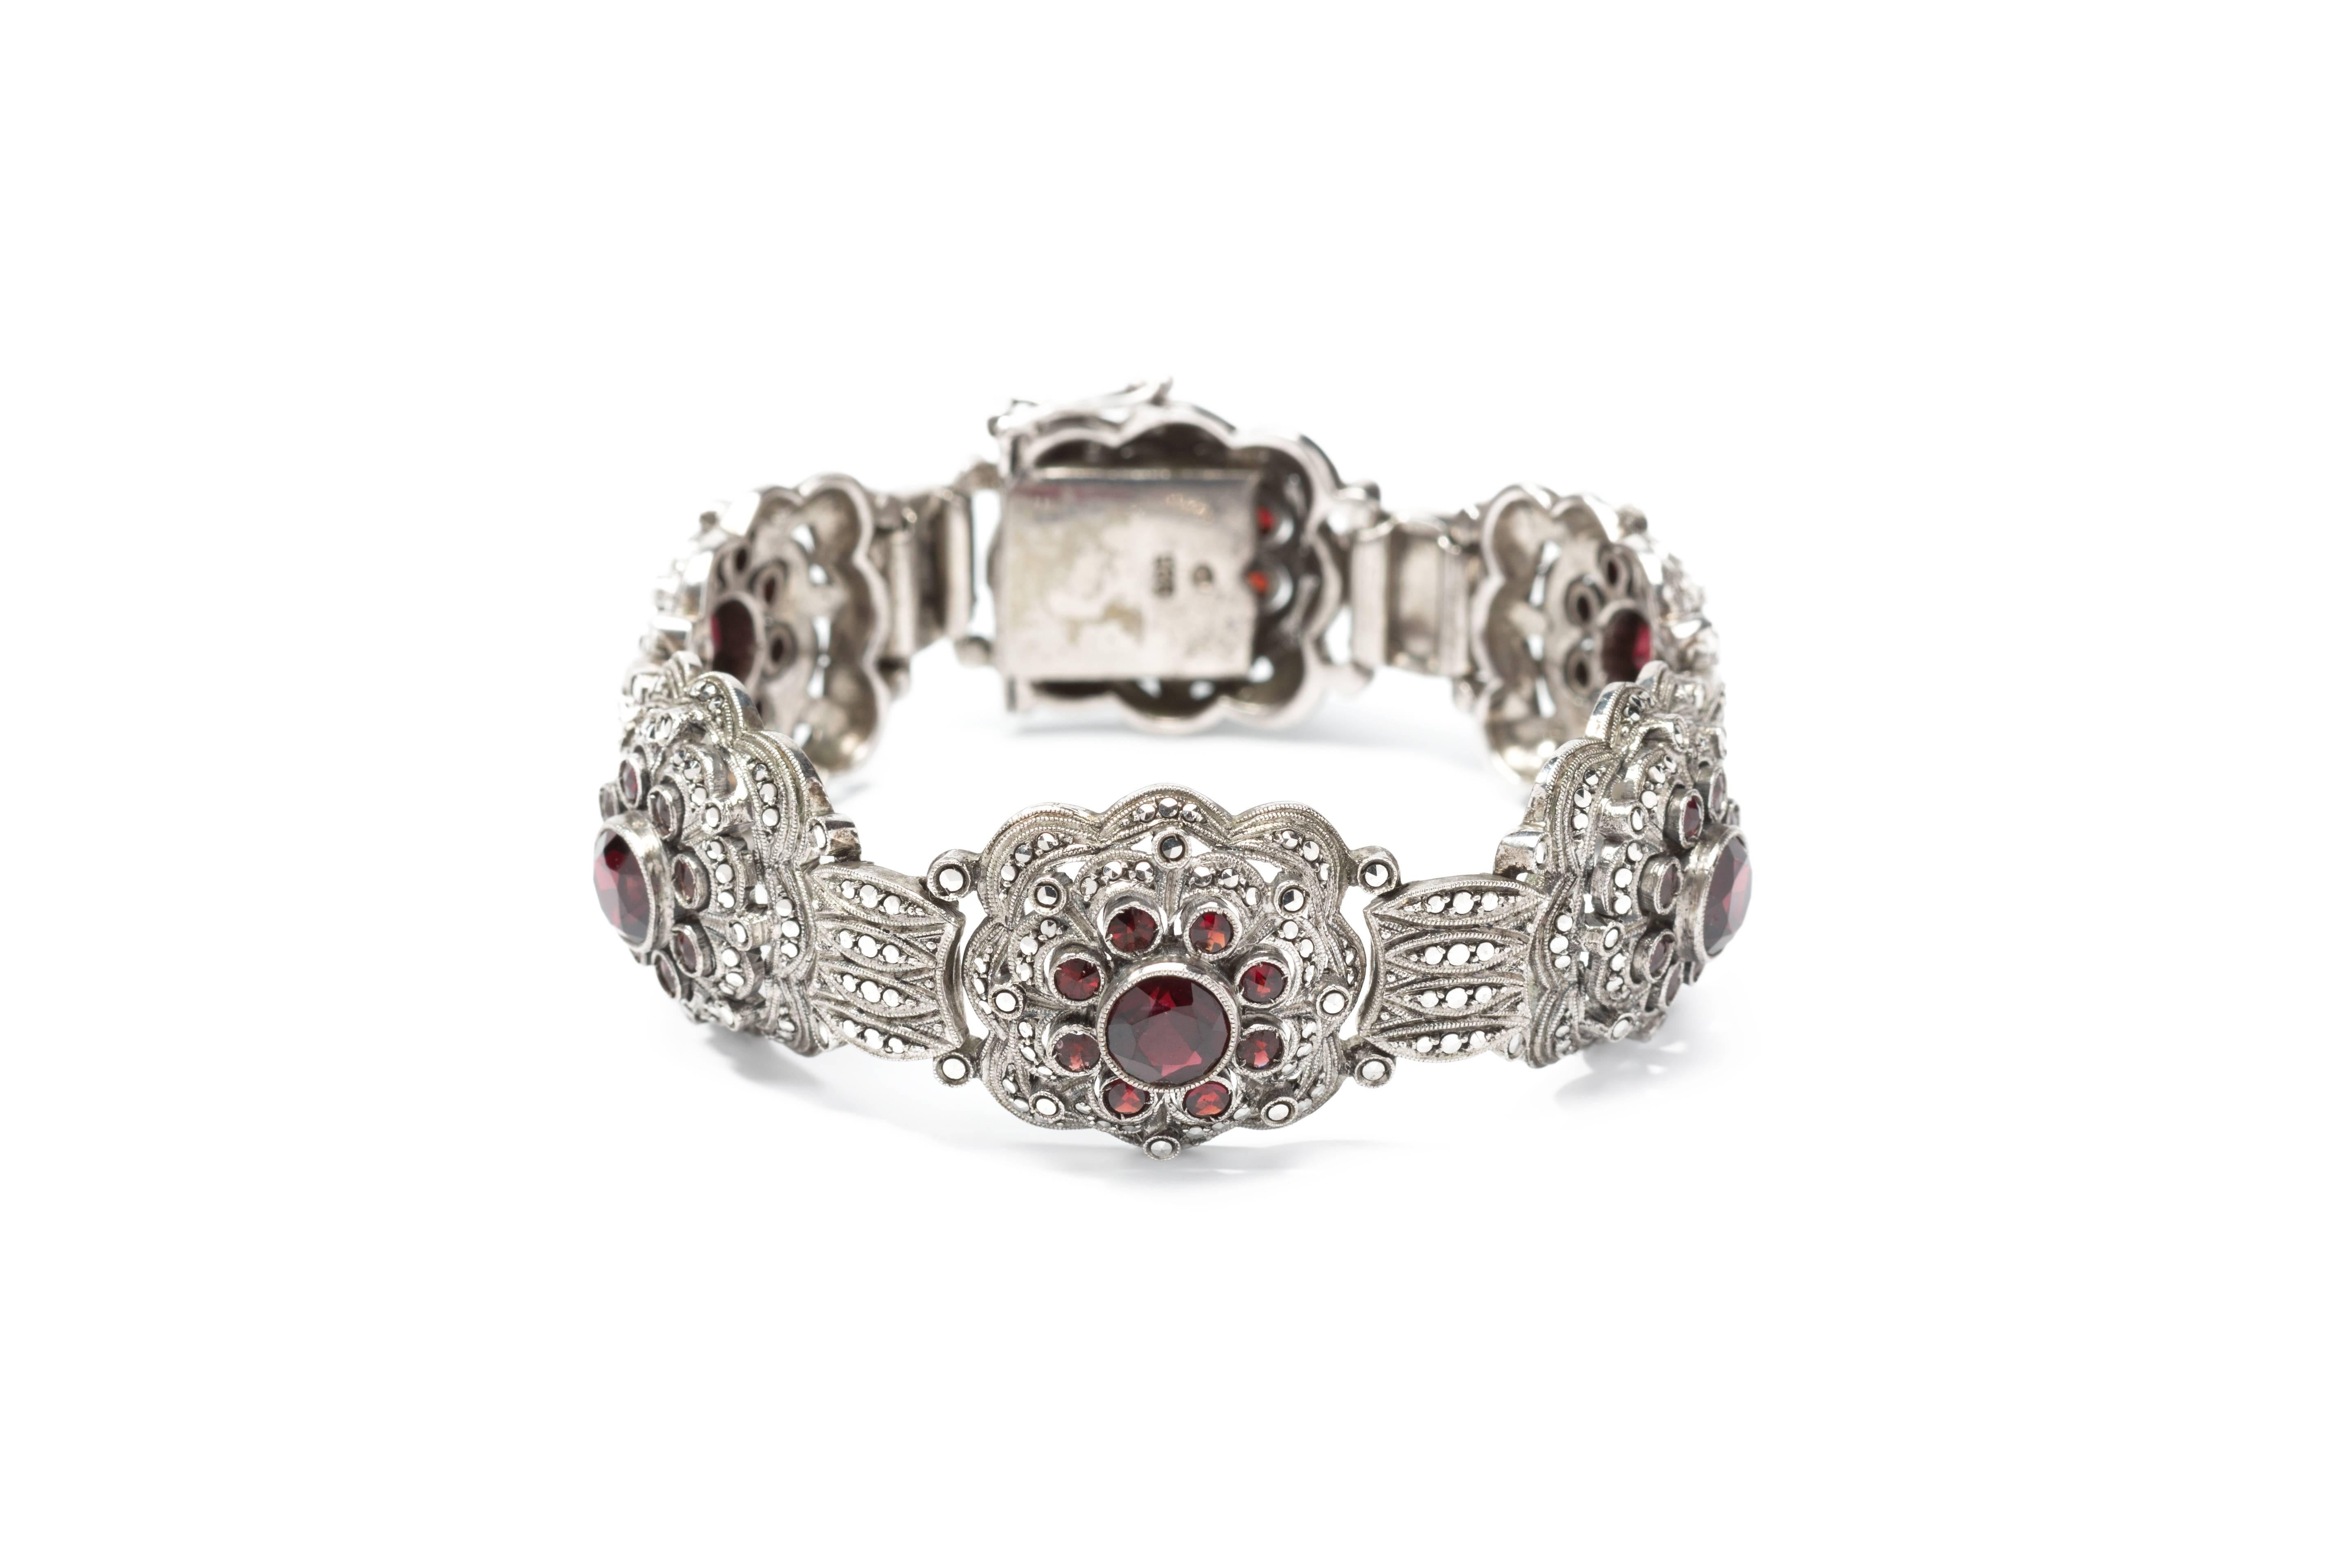 The multifaceted 53 round garnet decorated by marcasite stones. Mounted in silver. On the clasp marked: 925 and the Fahrner mark. Total weight: 46,2 g.
Length: 6.89 in ( 17,5 cm ), Width: 0.83 in ( 2,1 cm )